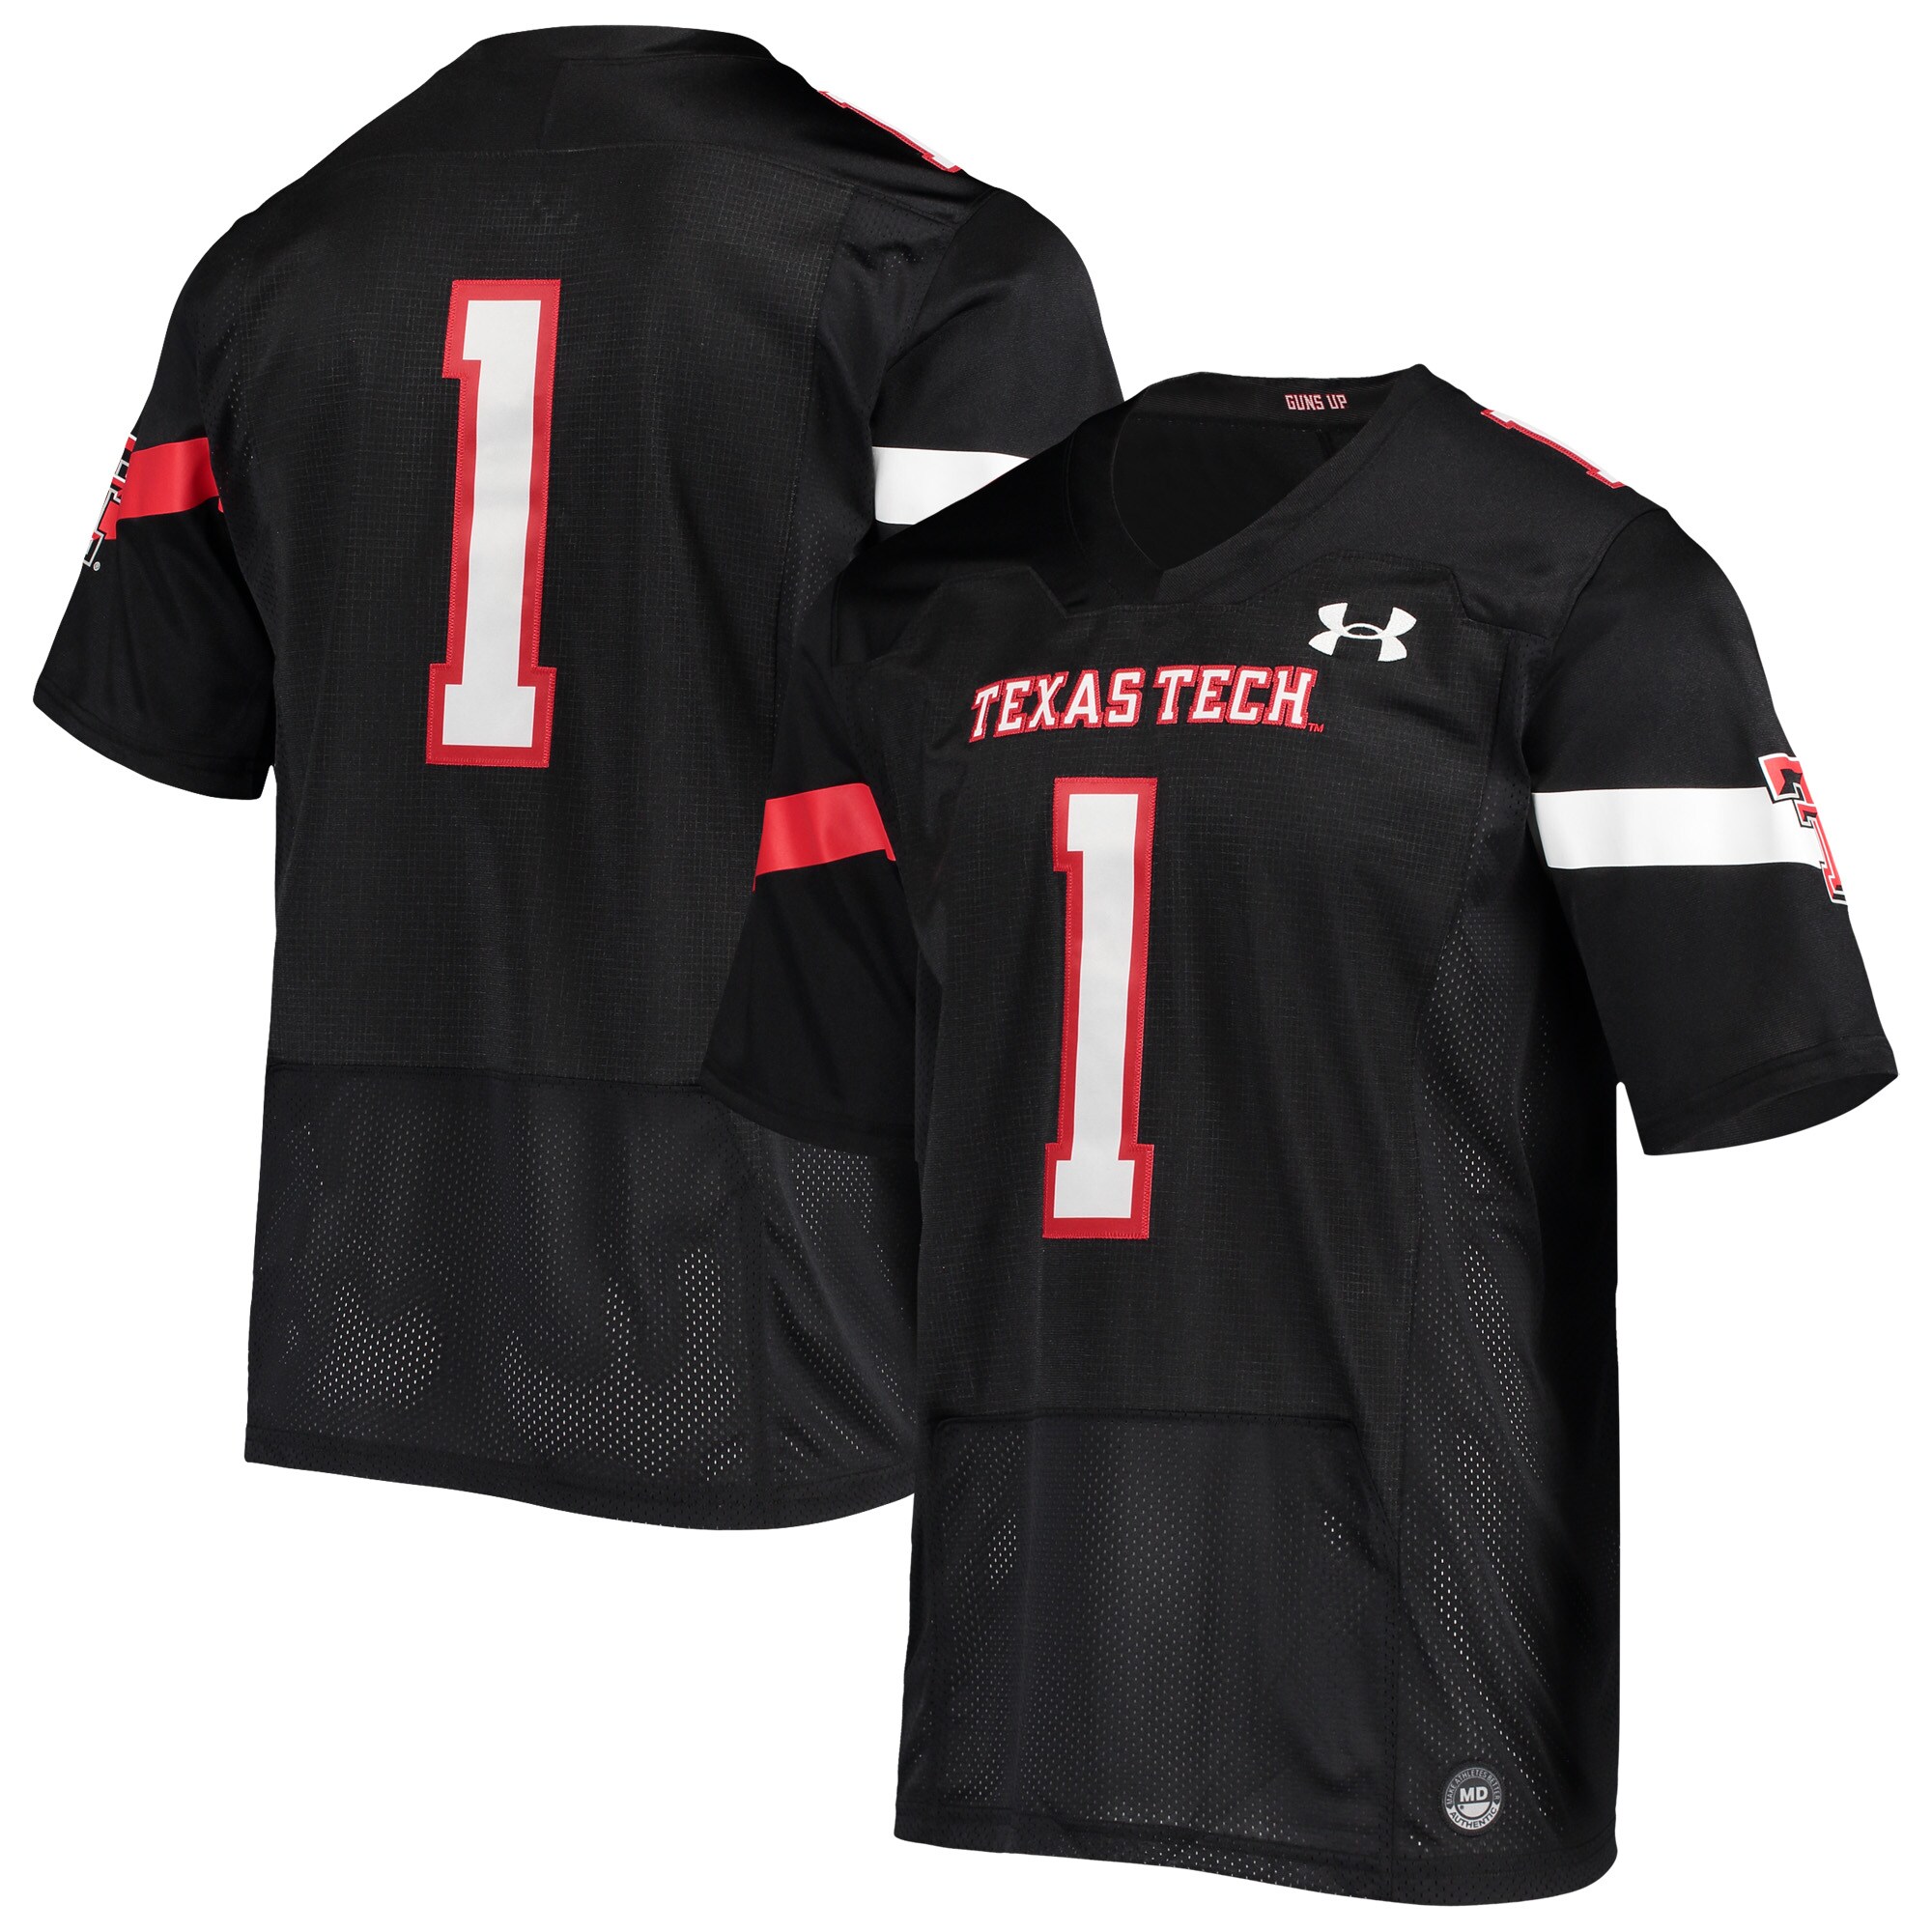 #1 Texas Tech Red Raiders Under Armour Team Premier  Football Shirts Jersey - Black For Youth Women Men